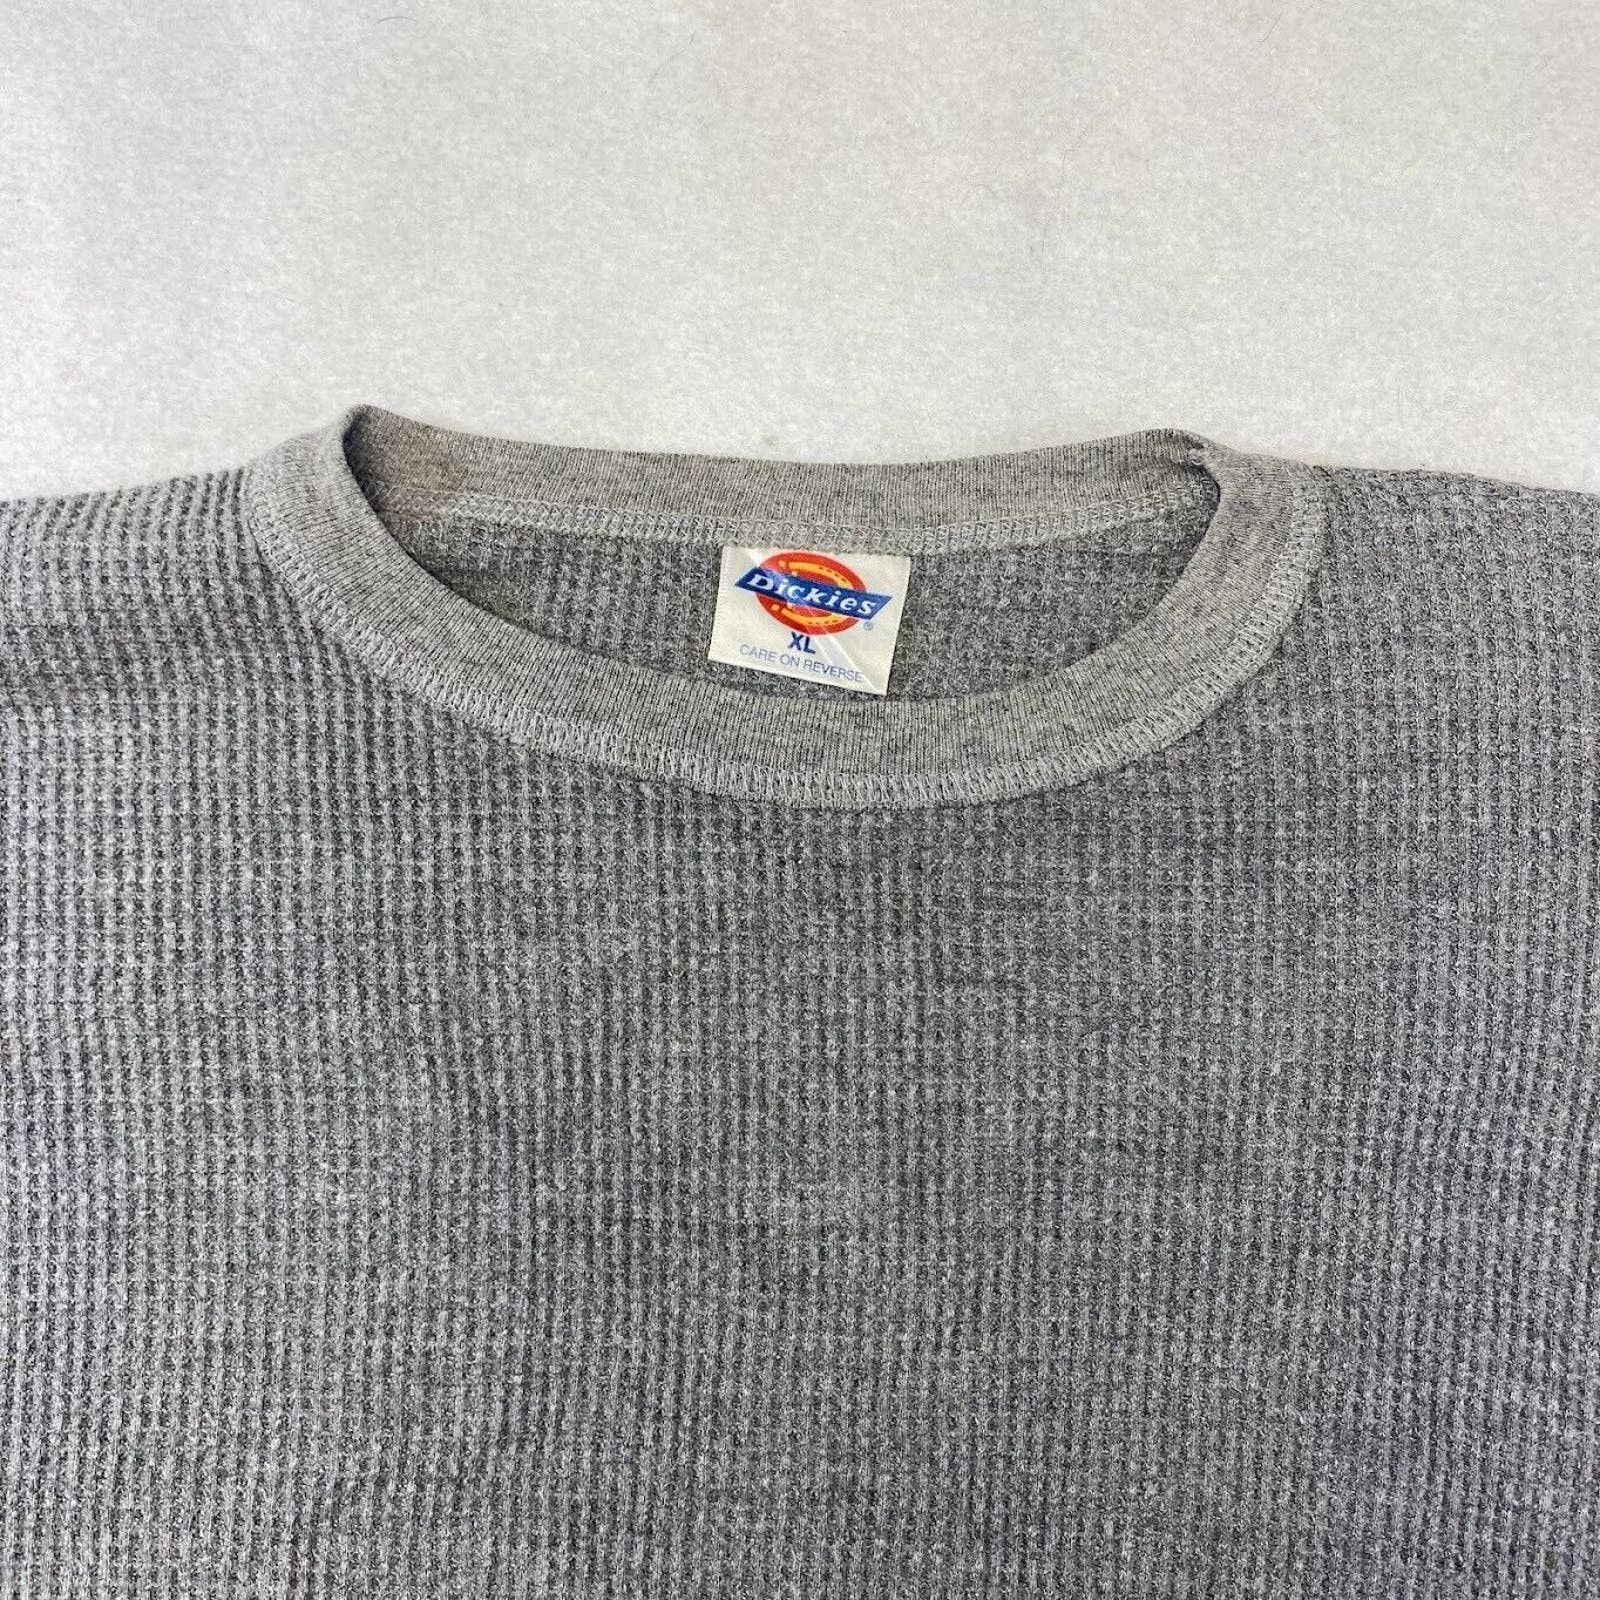 Dickies Dickies Streetwear Tee Thrifted Vintage Style Size XL Size US XL / EU 56 / 4 - 8 Thumbnail